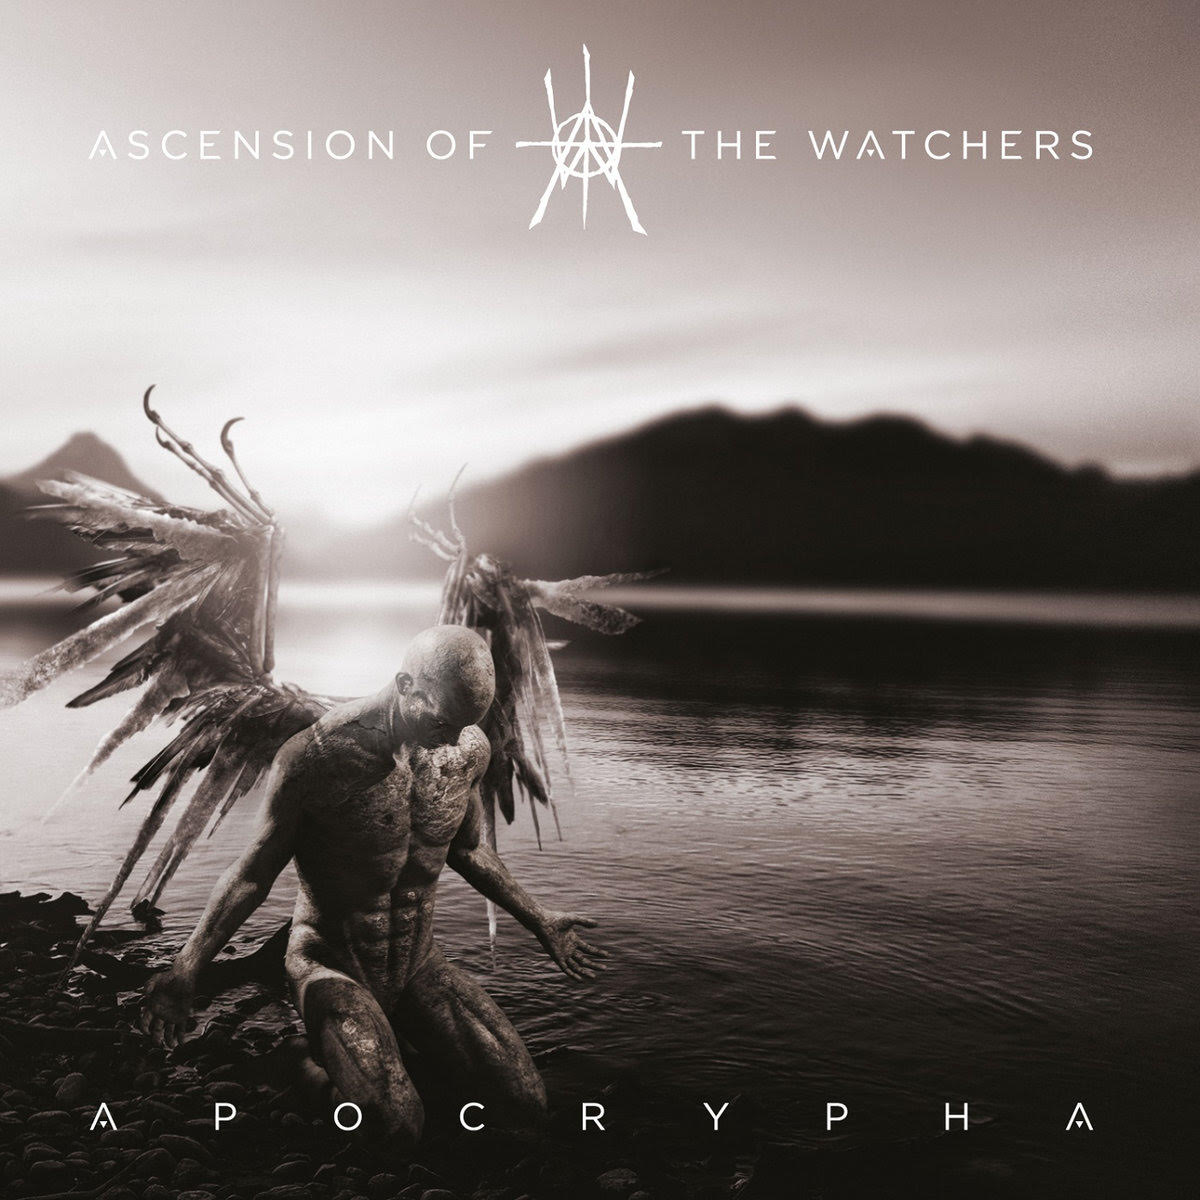 Ascension Of The Watchers - Apocrypha & Translations (Apocrypha Remixed) (2CD) - CD - New